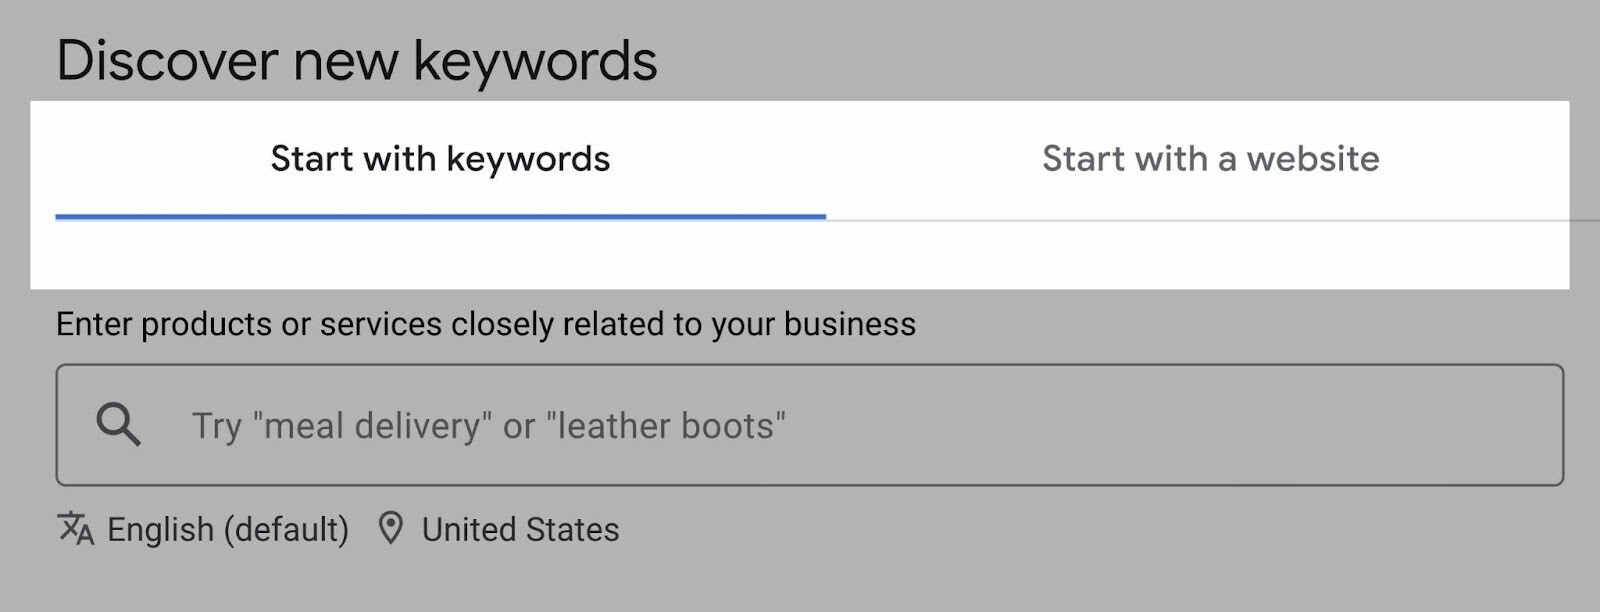 Start with keywords option highlighted